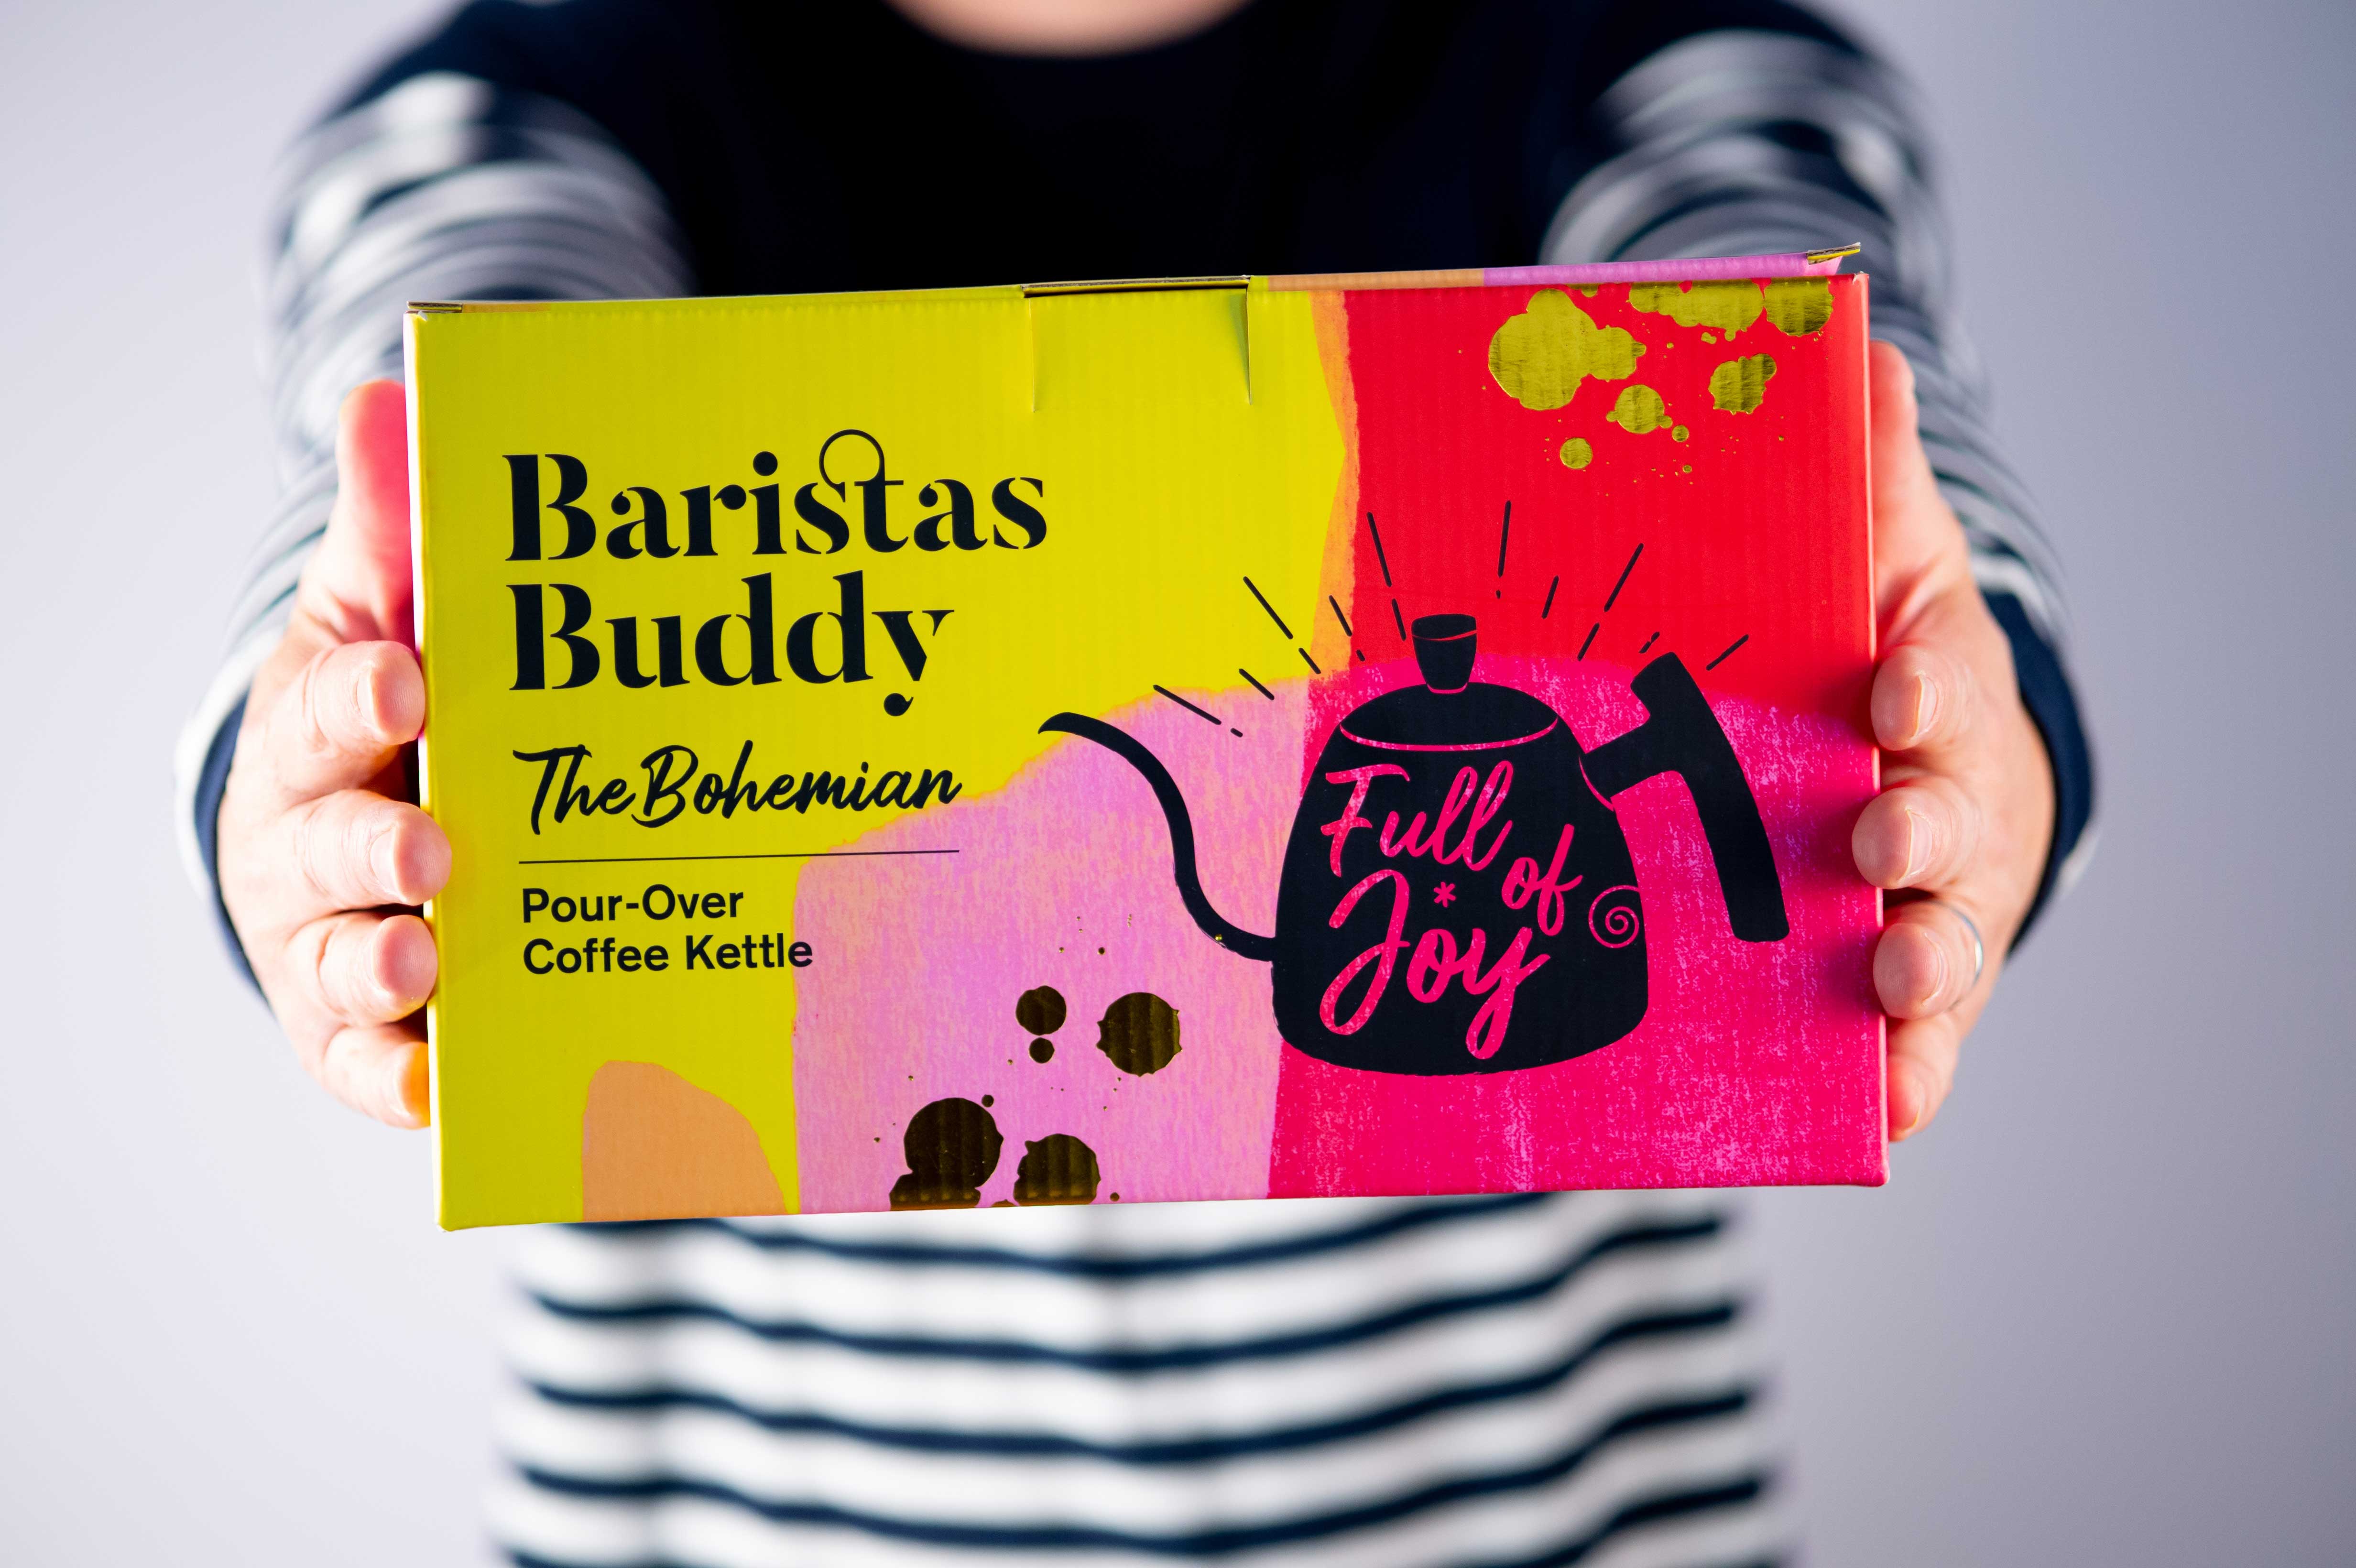 Tidy Studio Creates Brand Identity and Packaging Design for Baristas Buddy